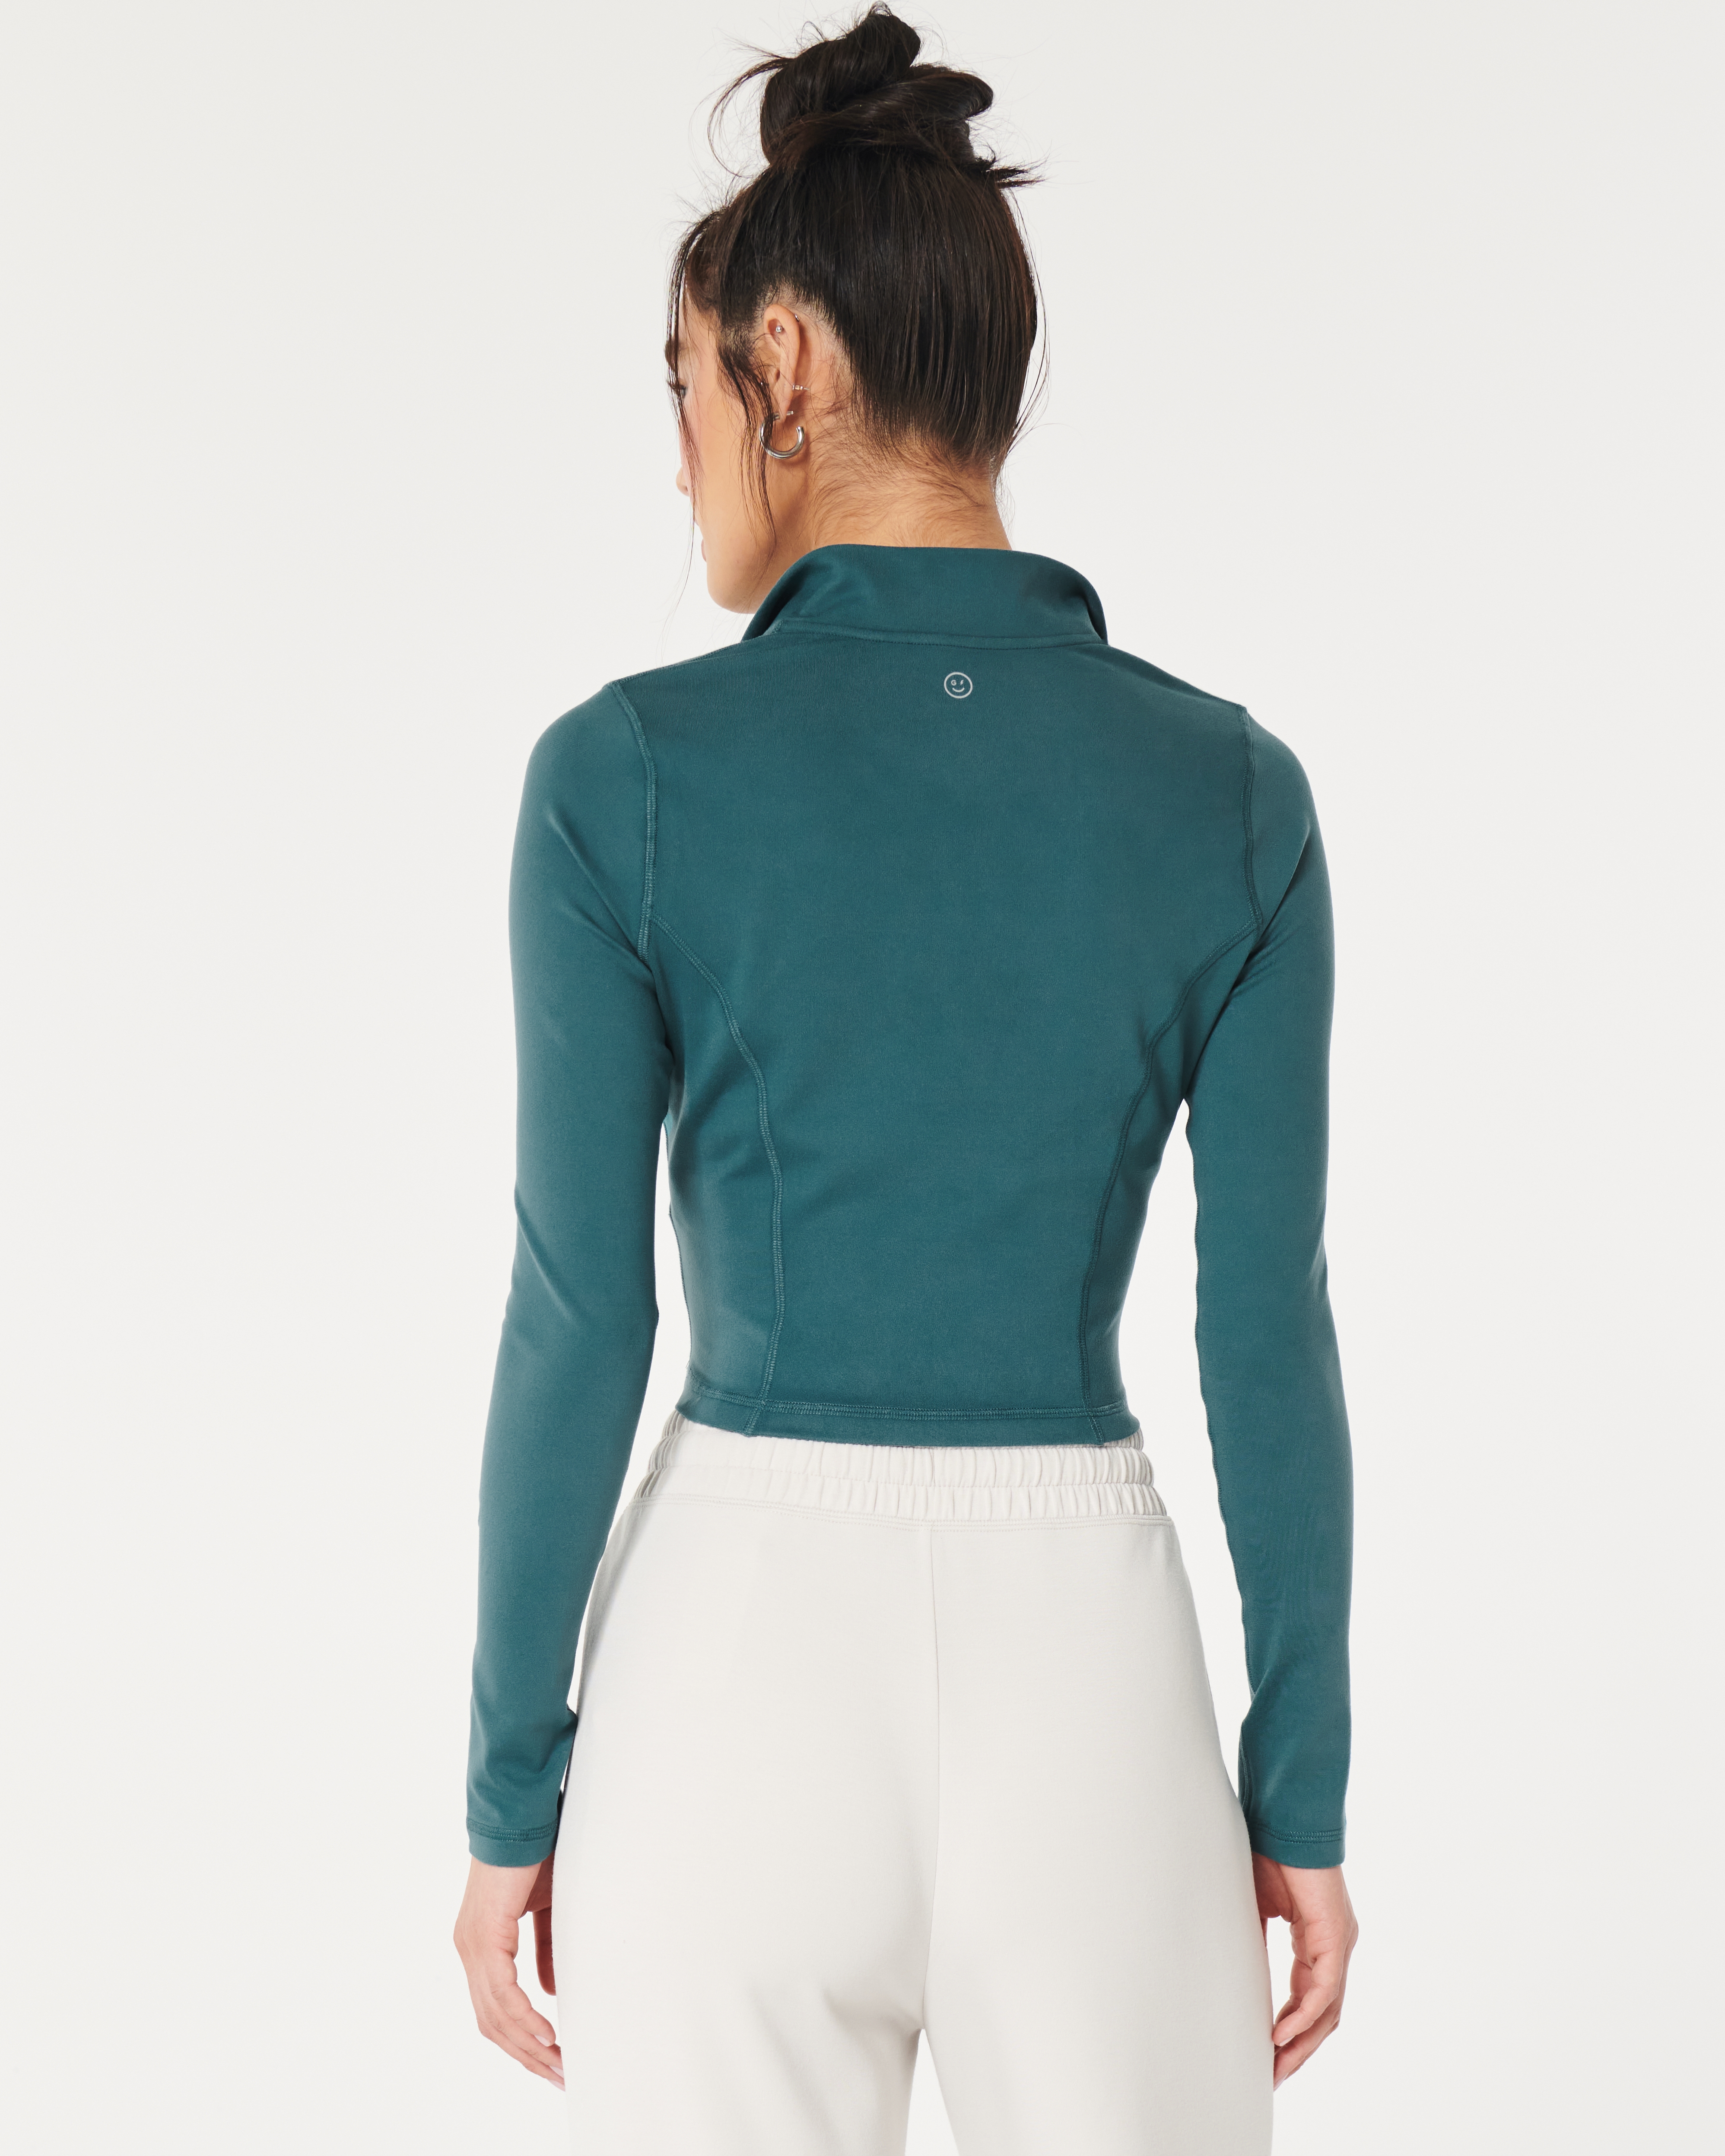 Hollister Gilly Hicks Active Recharge Long-Sleeve Top